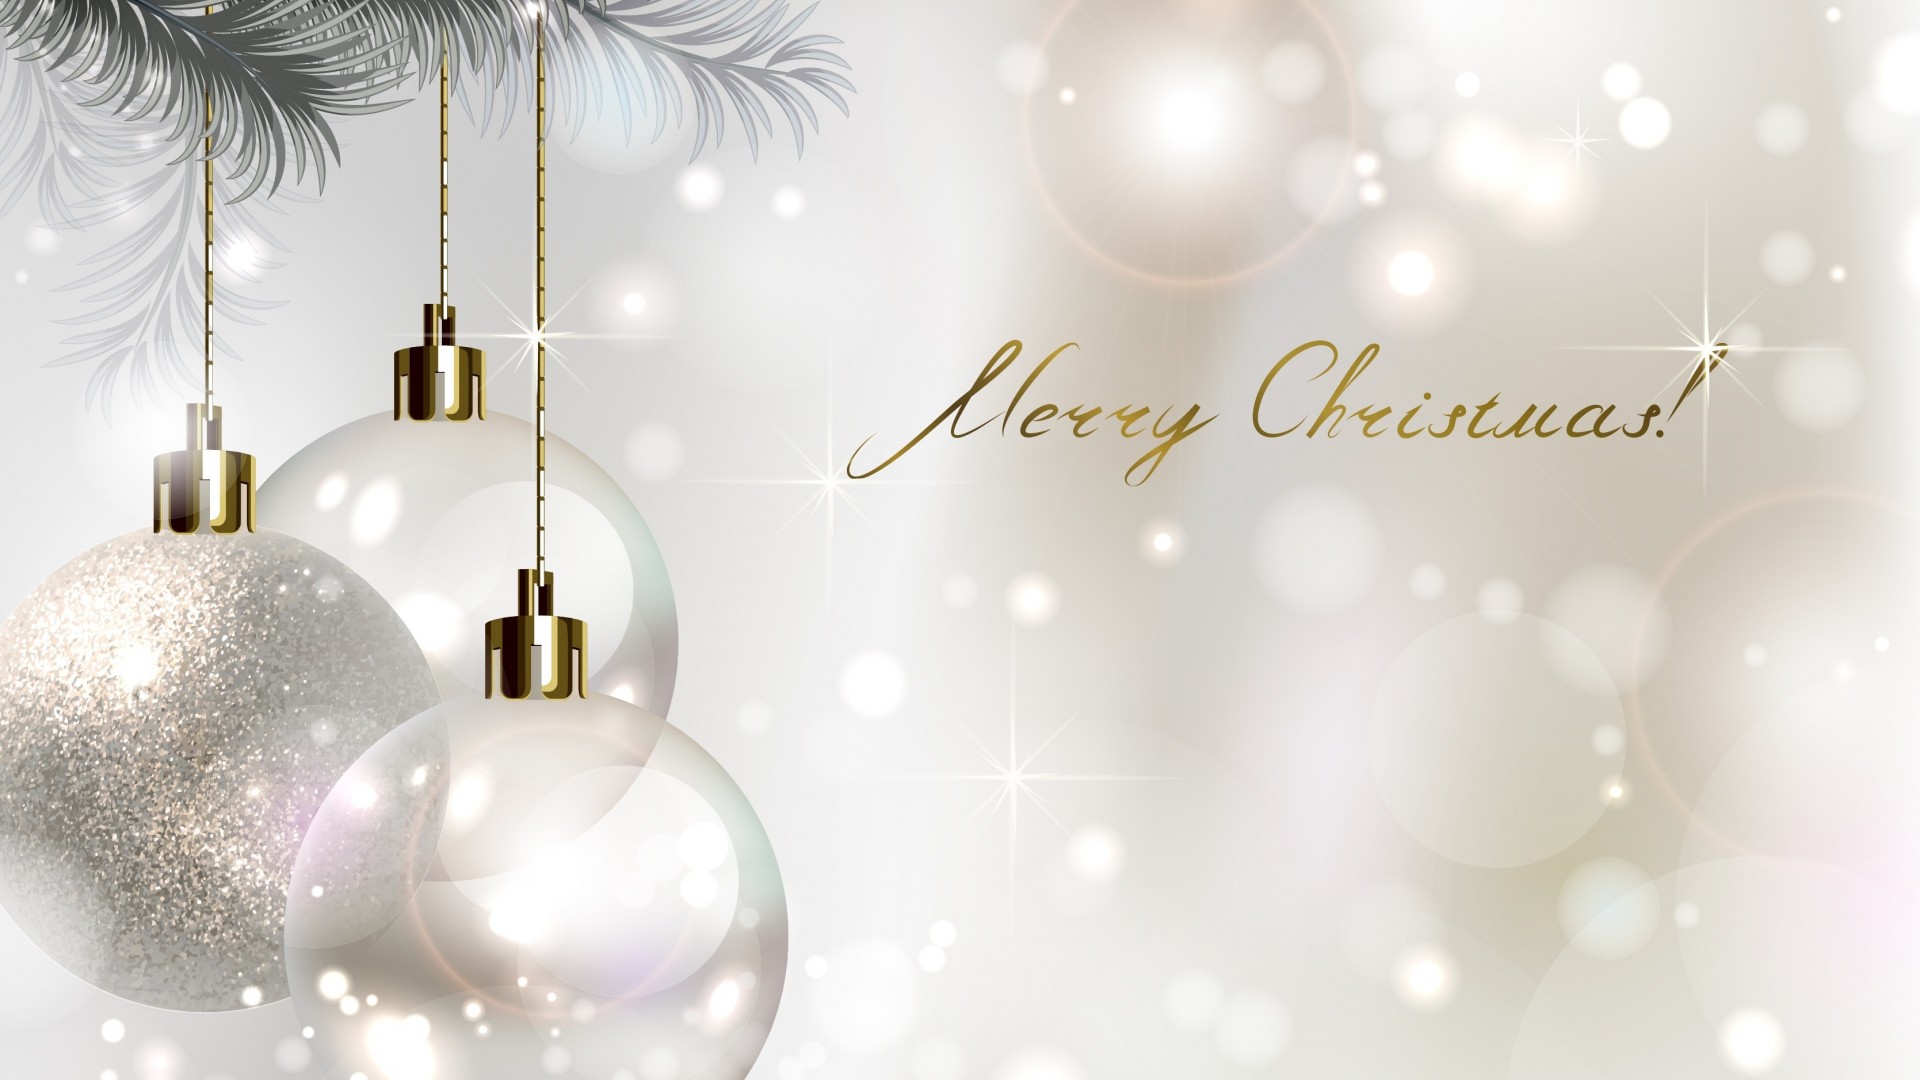 free christmas wallpaper backgrounds